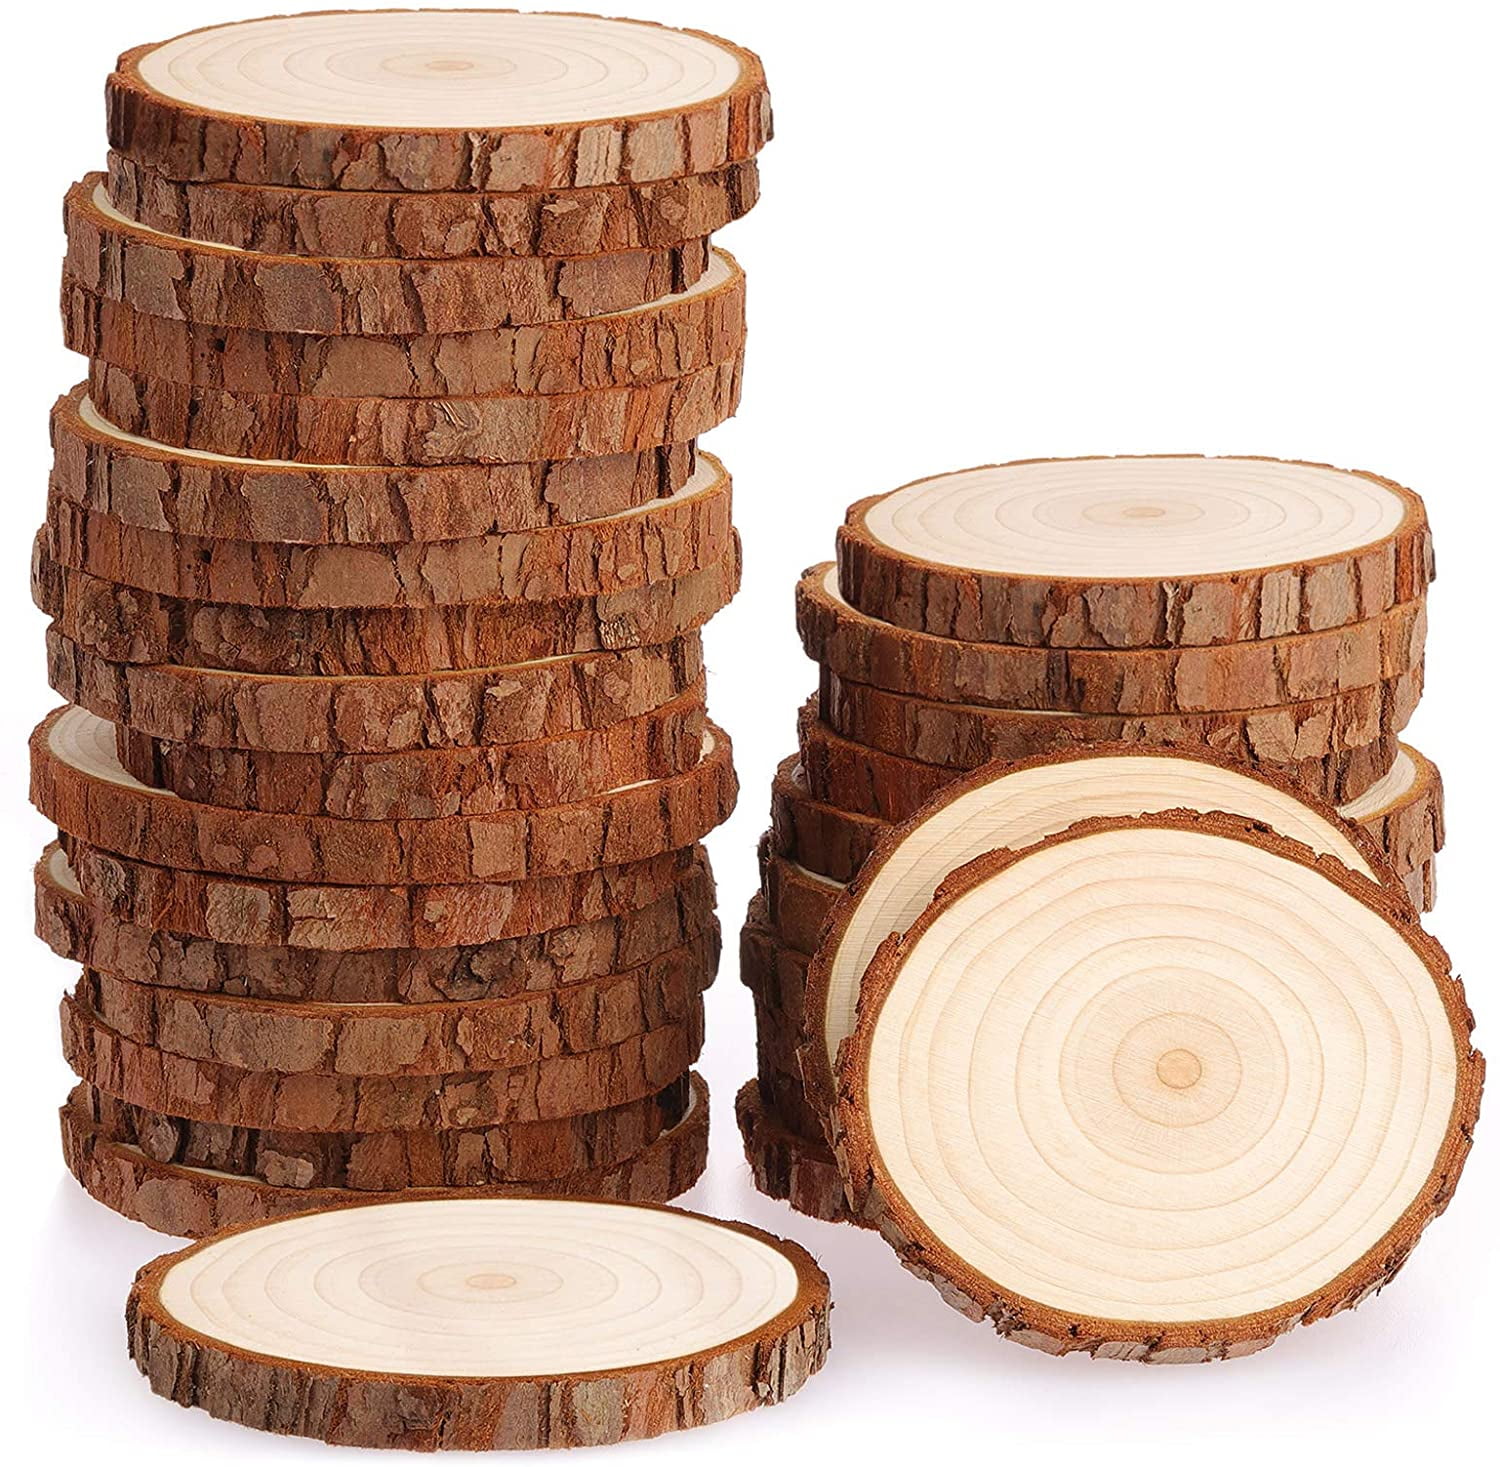 Unfinished Natural Wood Slices 25Pcs 3.1-3.5 inch Wood Coaster Pieces Craft Wood kit Predrilled with Hole Wooden Circles Great for Arts and Crafts Christmas Ornaments DIY Crafts Rustic Wedding 